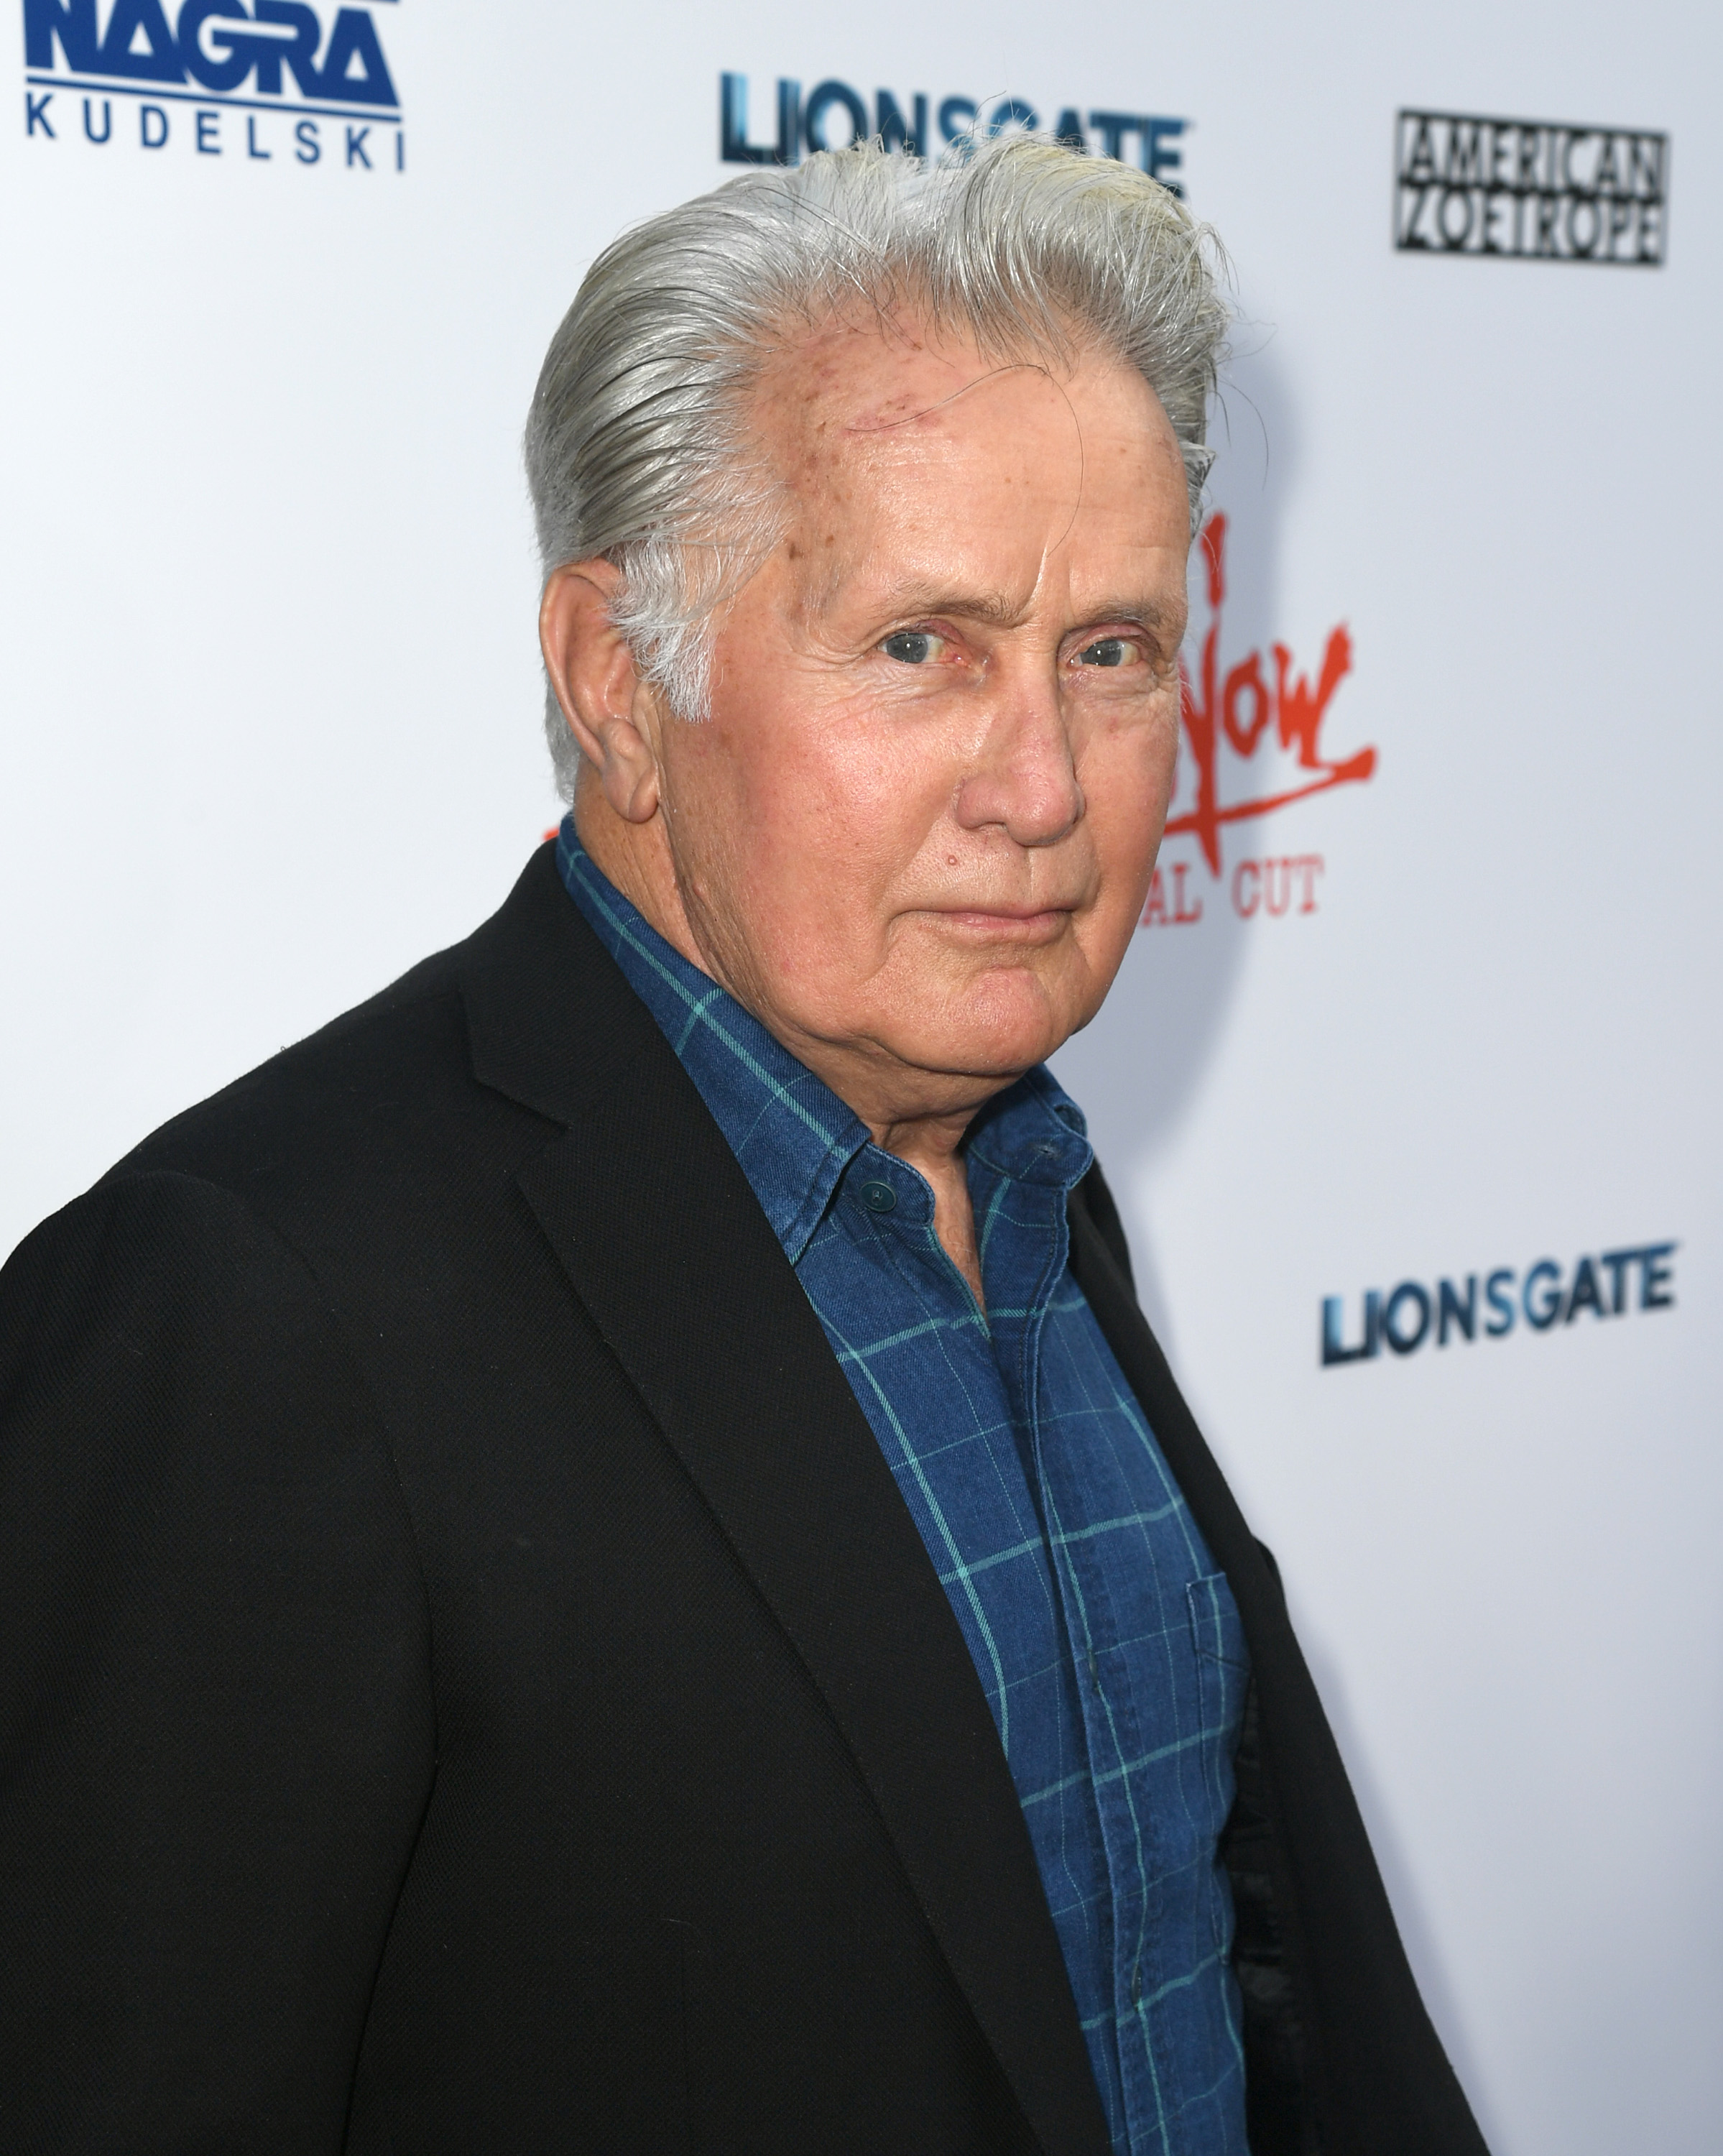 Martin Sheen arrives at the premiere of "Apocalypse Now Final Cut" at ArcLight Cinerama Dome on August 12, 2019 in Hollywood, California | Source: Getty Images